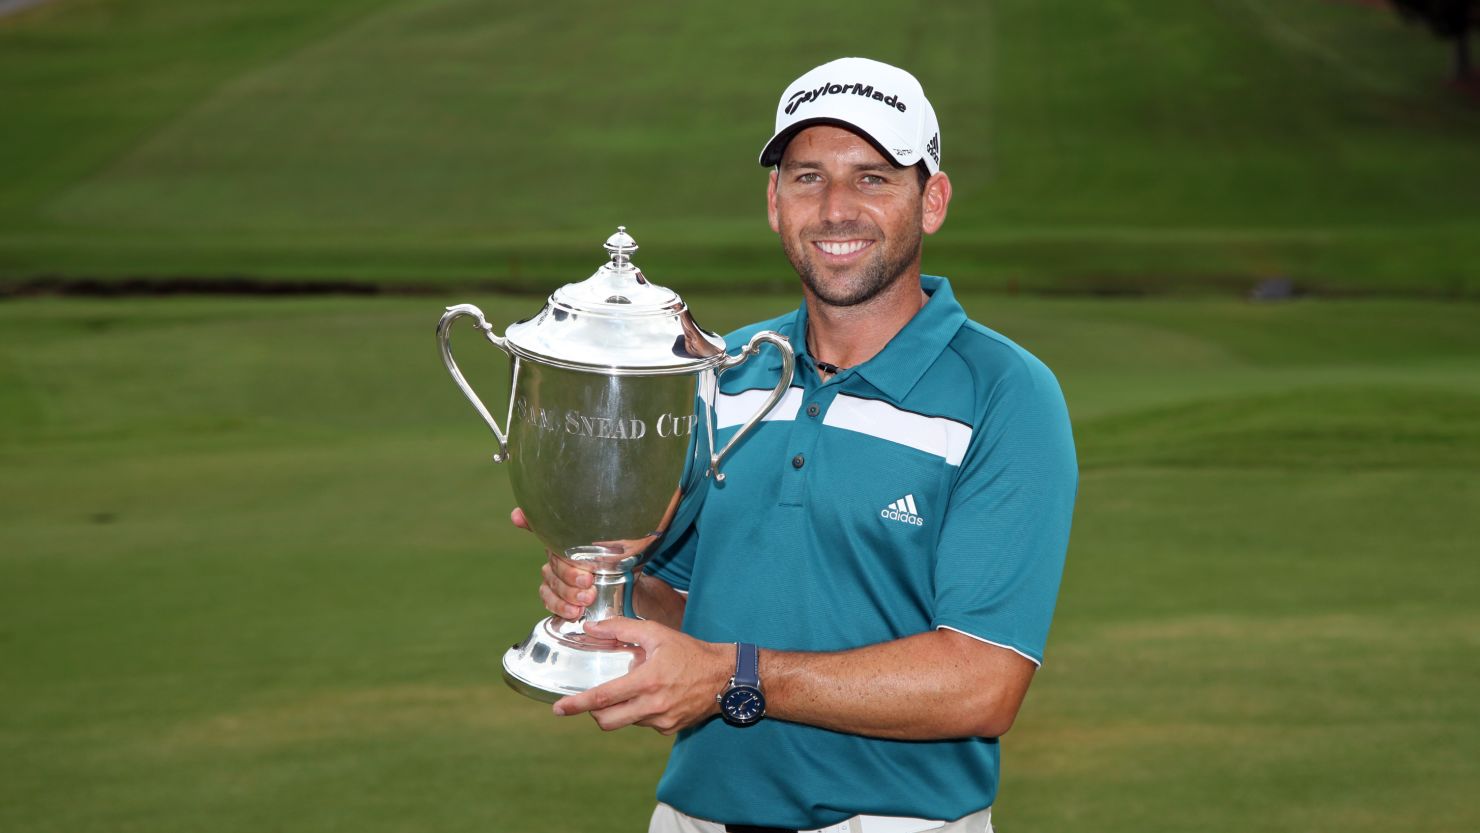 Sergio Garcia takes hold of the Sam Snead Cup following his first win at a PGA Tour event since 2008.